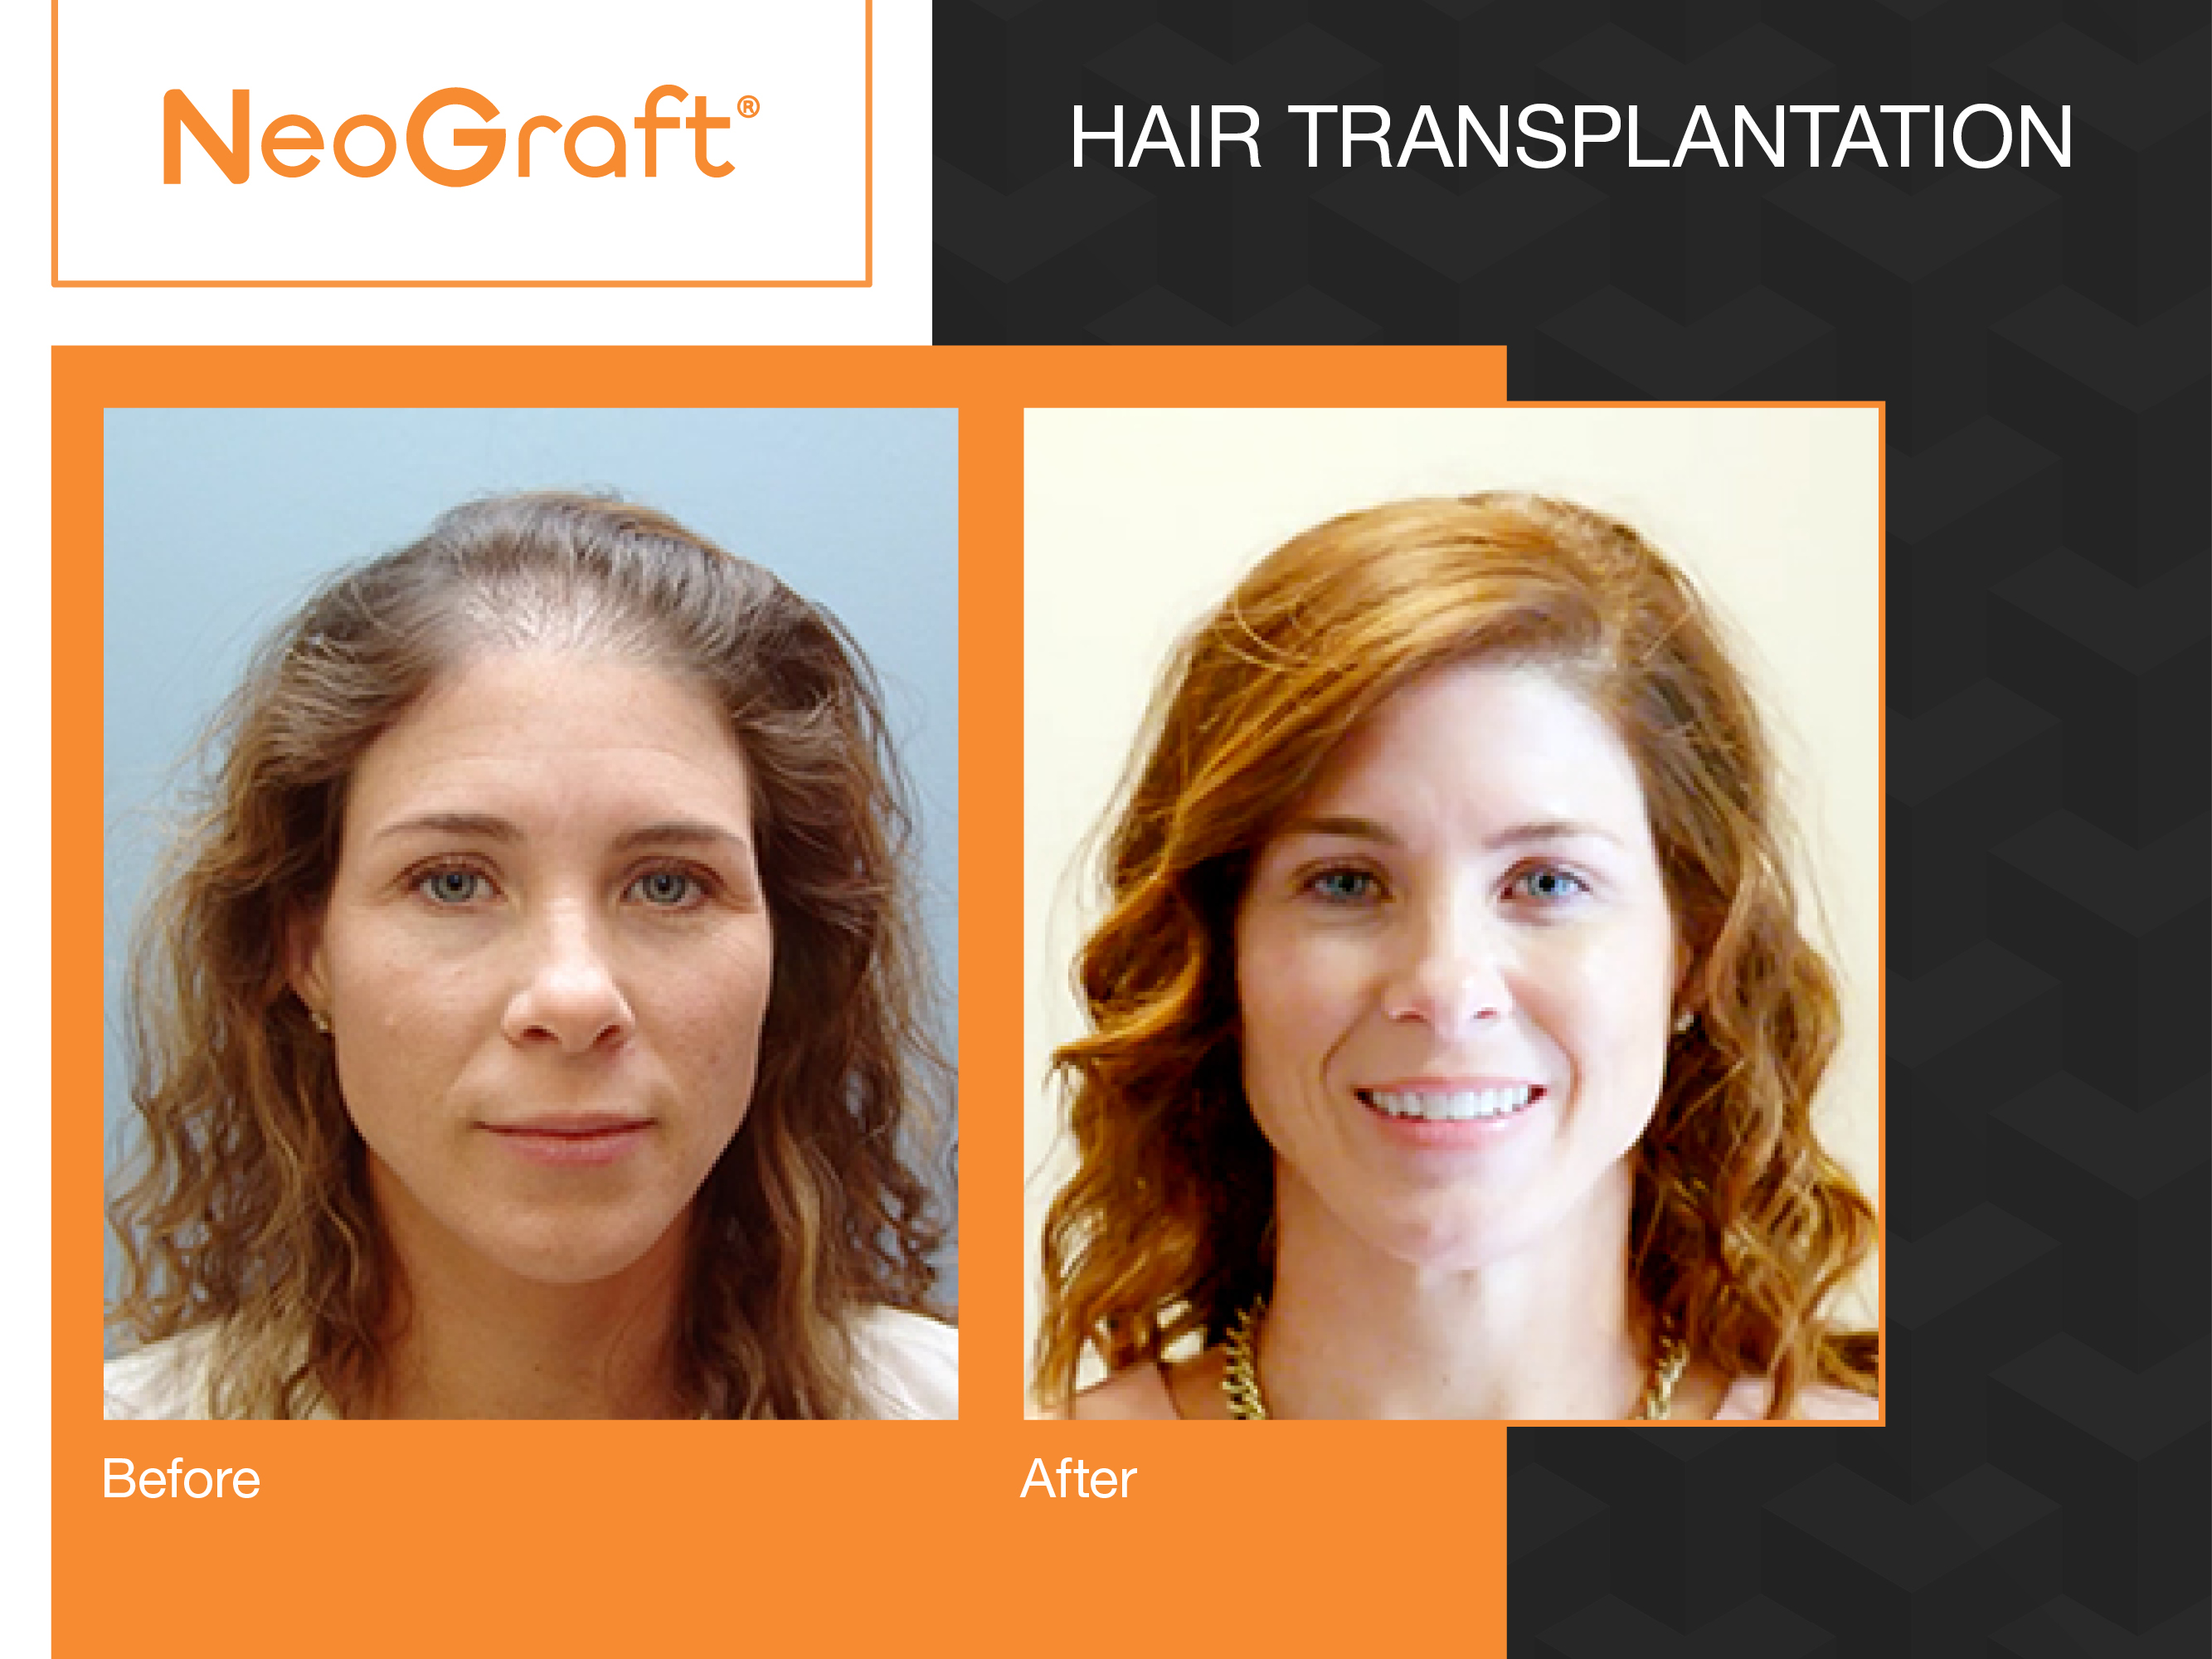 NeoGraft before and after of a woman's hair.